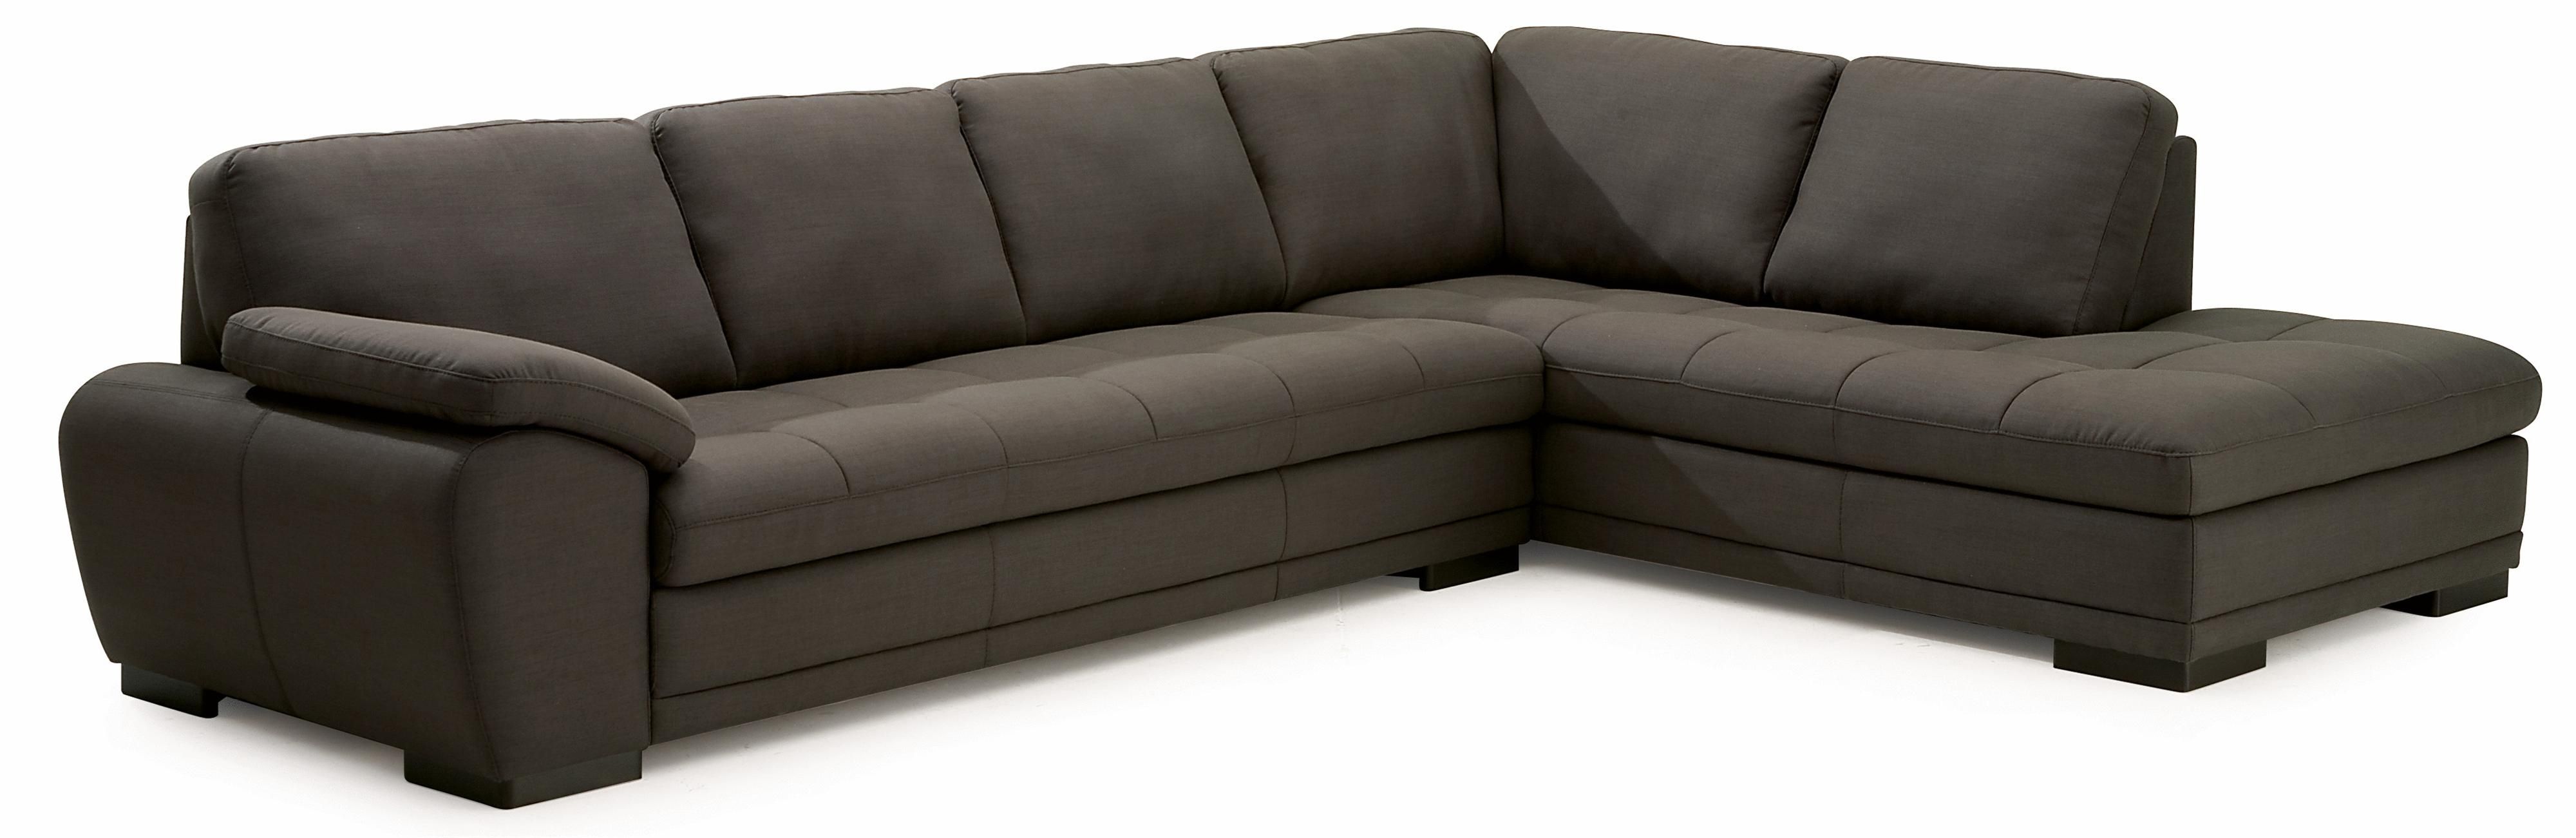 Palliser Miami Contemporary 2 Piece Sectional Sofa With Right Facing In Miami Sectional Sofas (Photo 1 of 10)